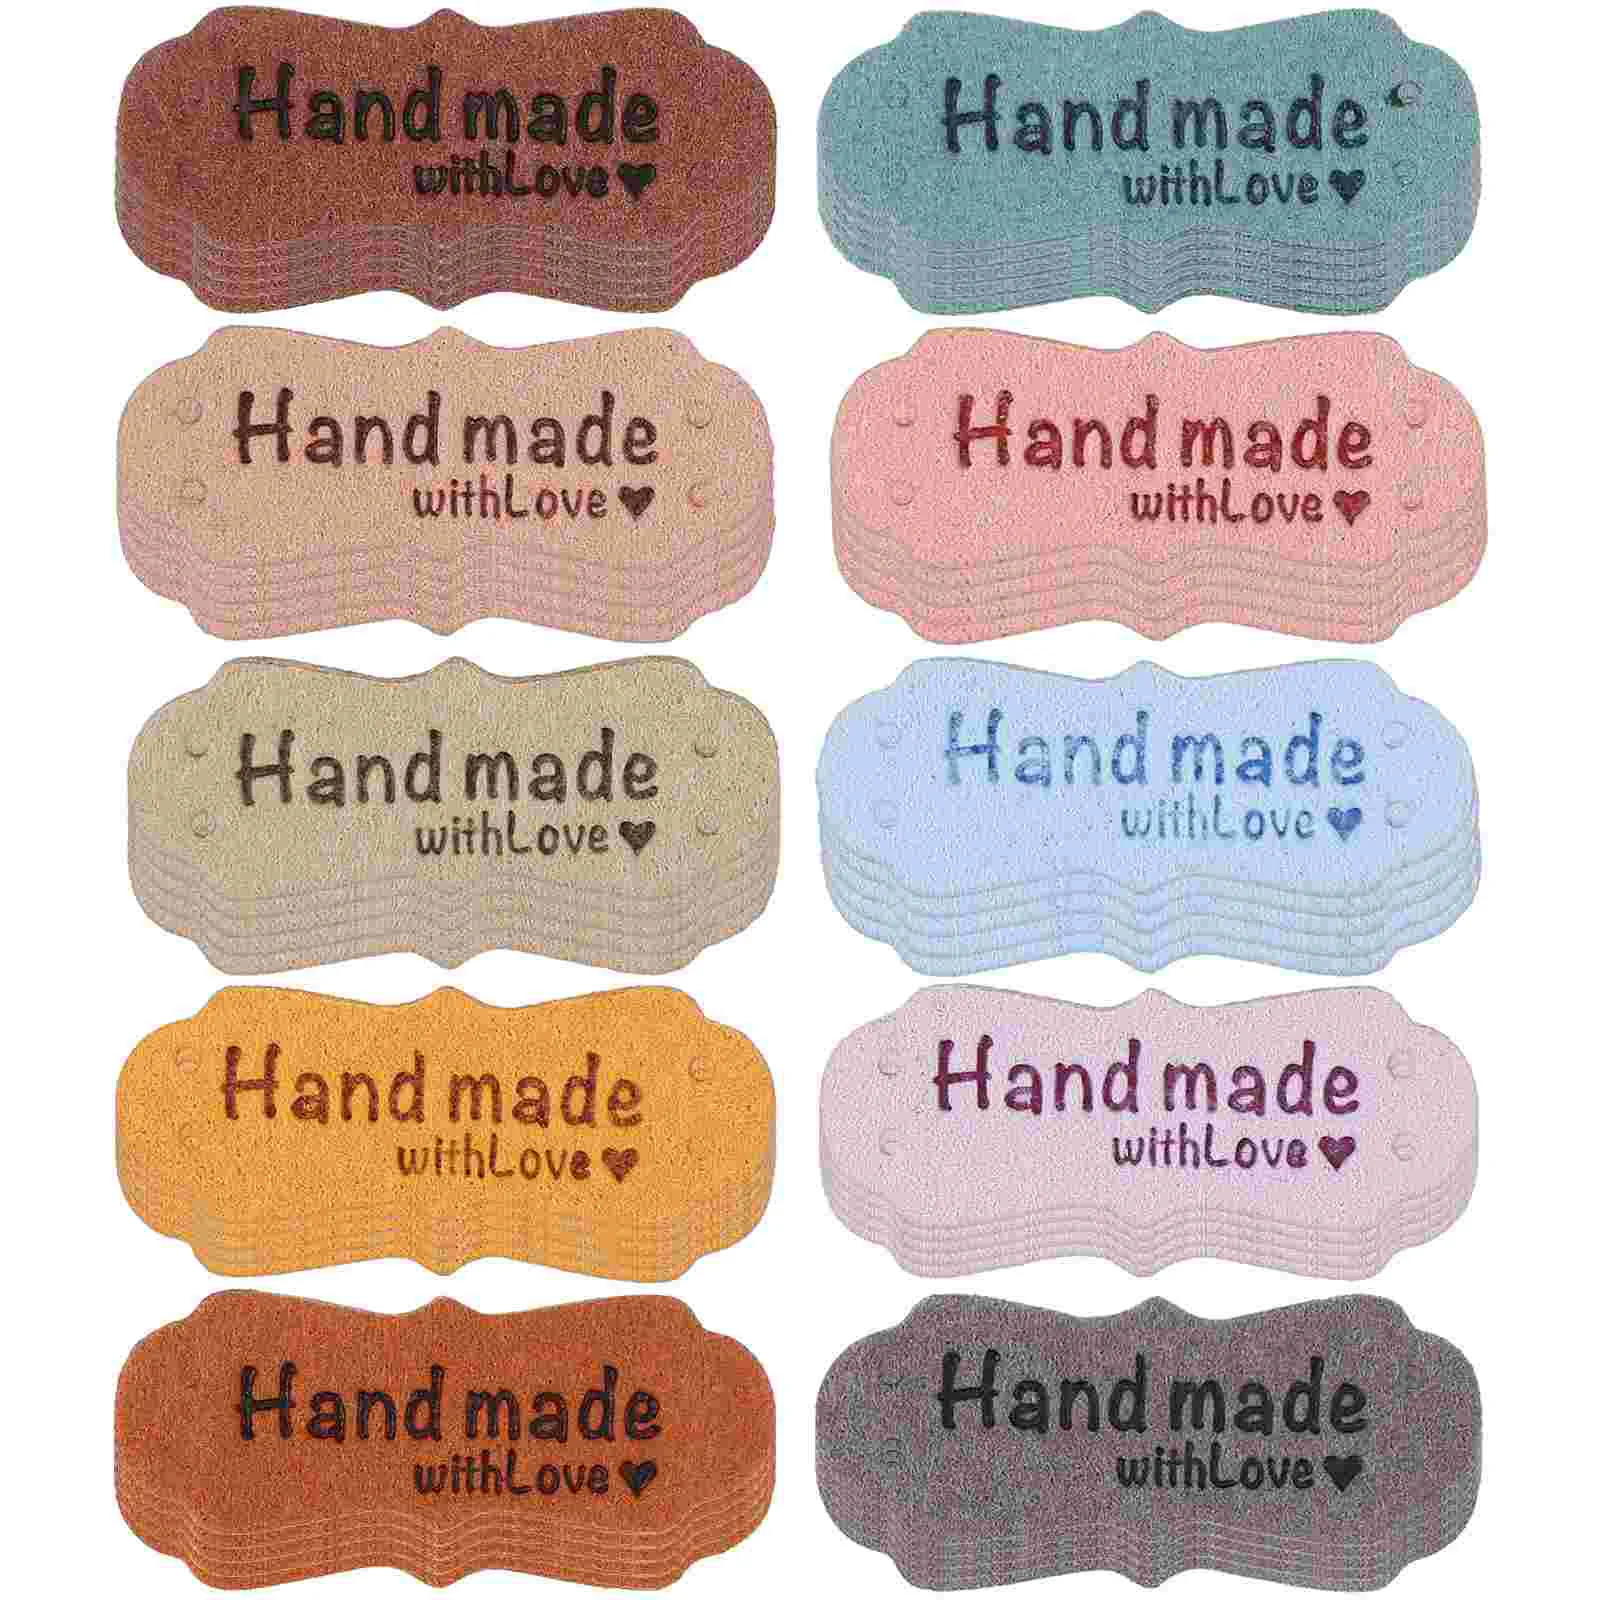 

Tagshandmade Labels Crochet Label Tag Pulove Embellishmentsew Accessories Clothes Knitting Hat Delicate Made Supplies Knitted